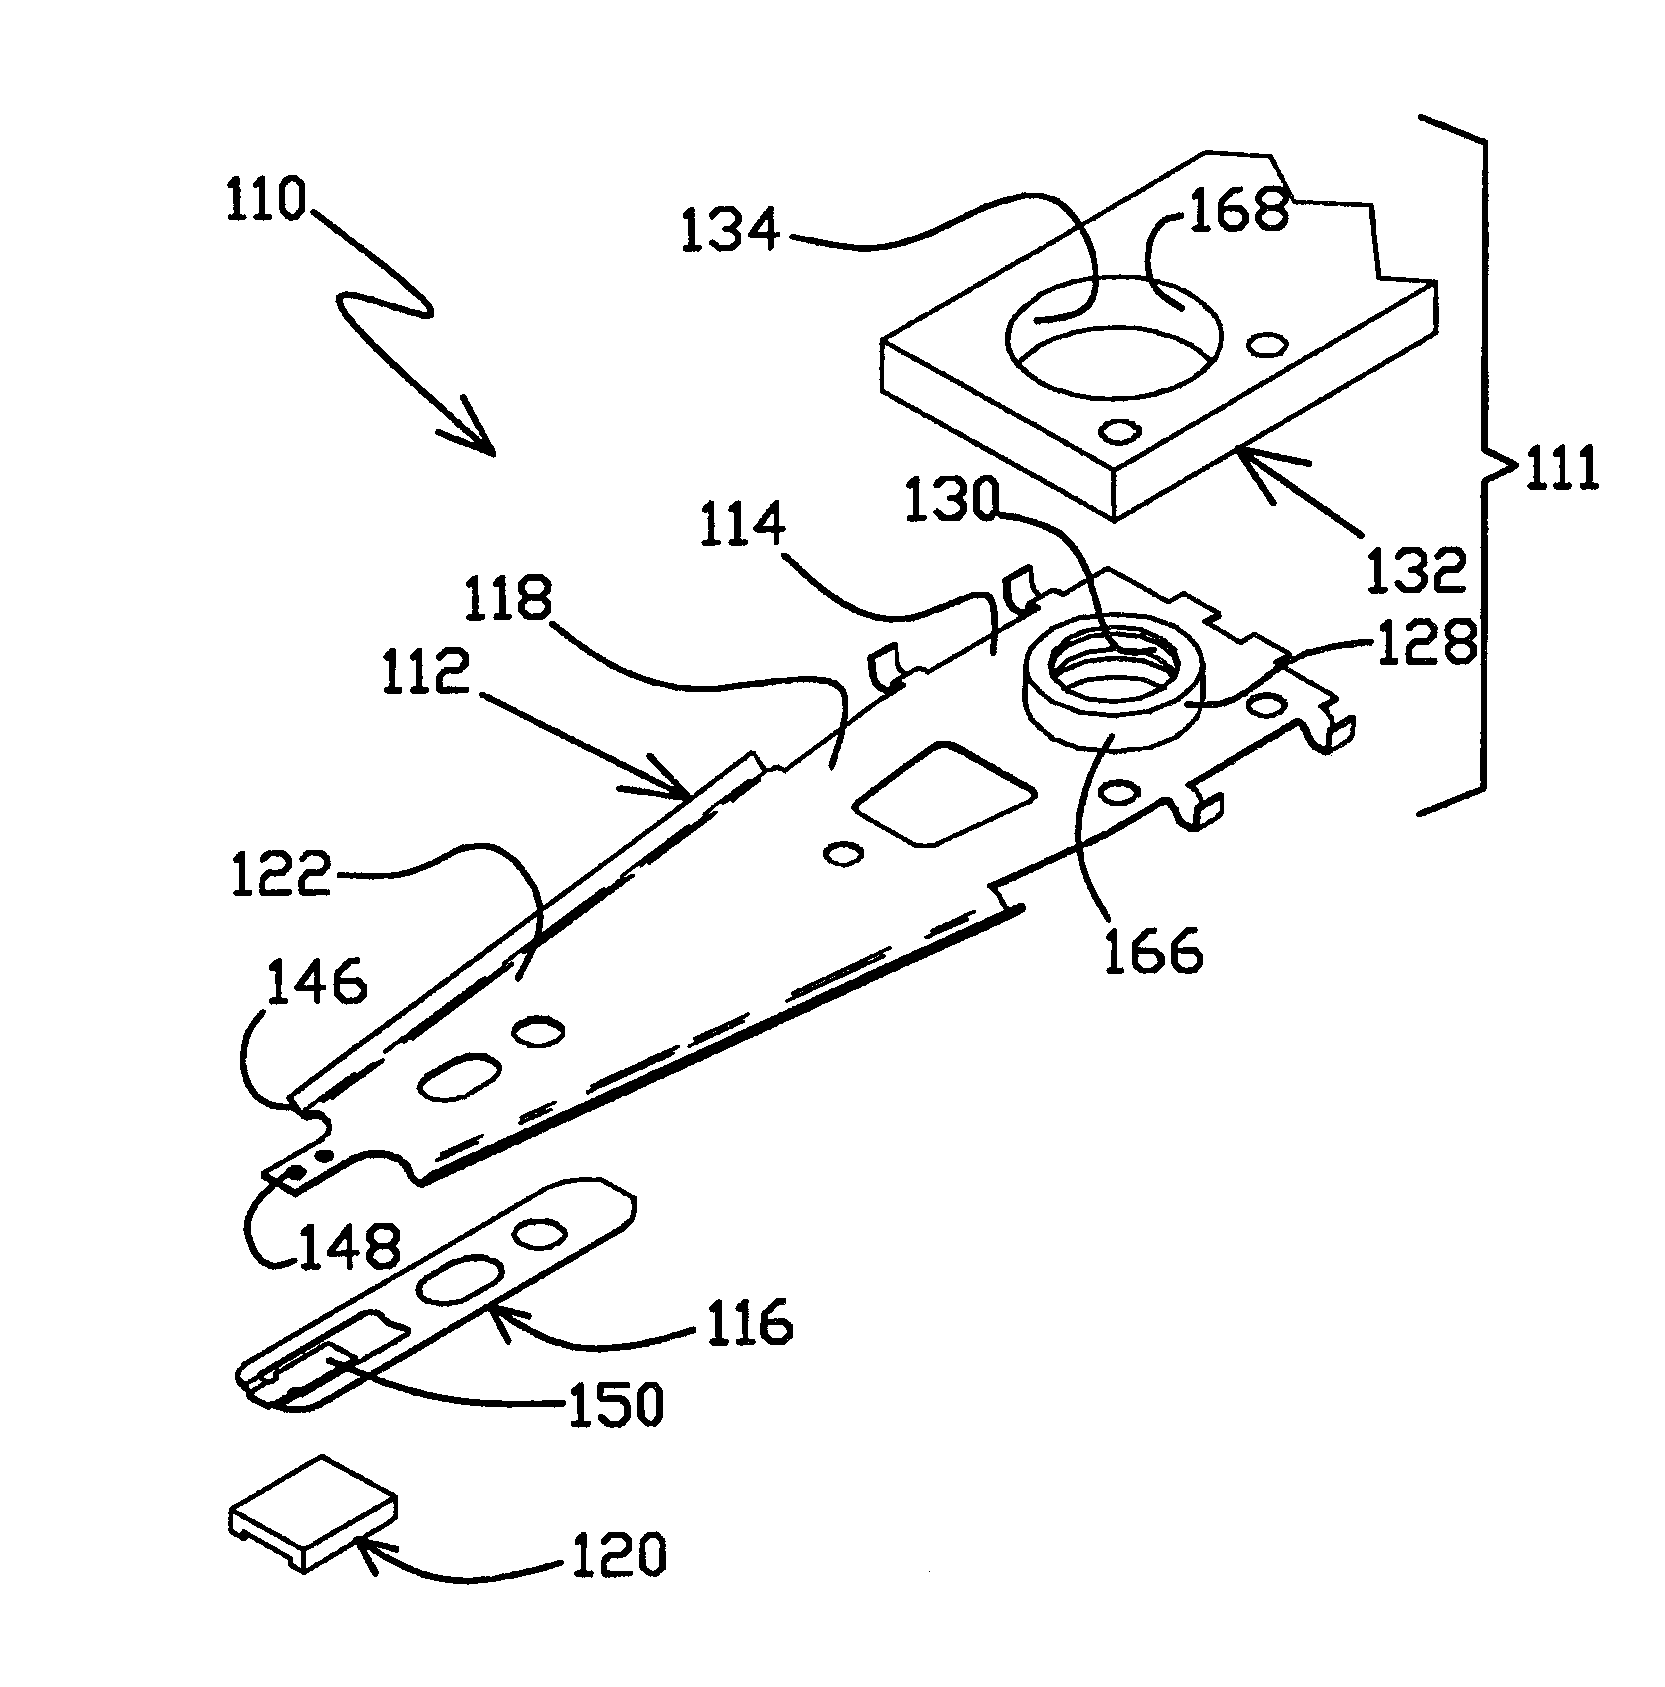 Method of forming a head suspension with an integral boss tower